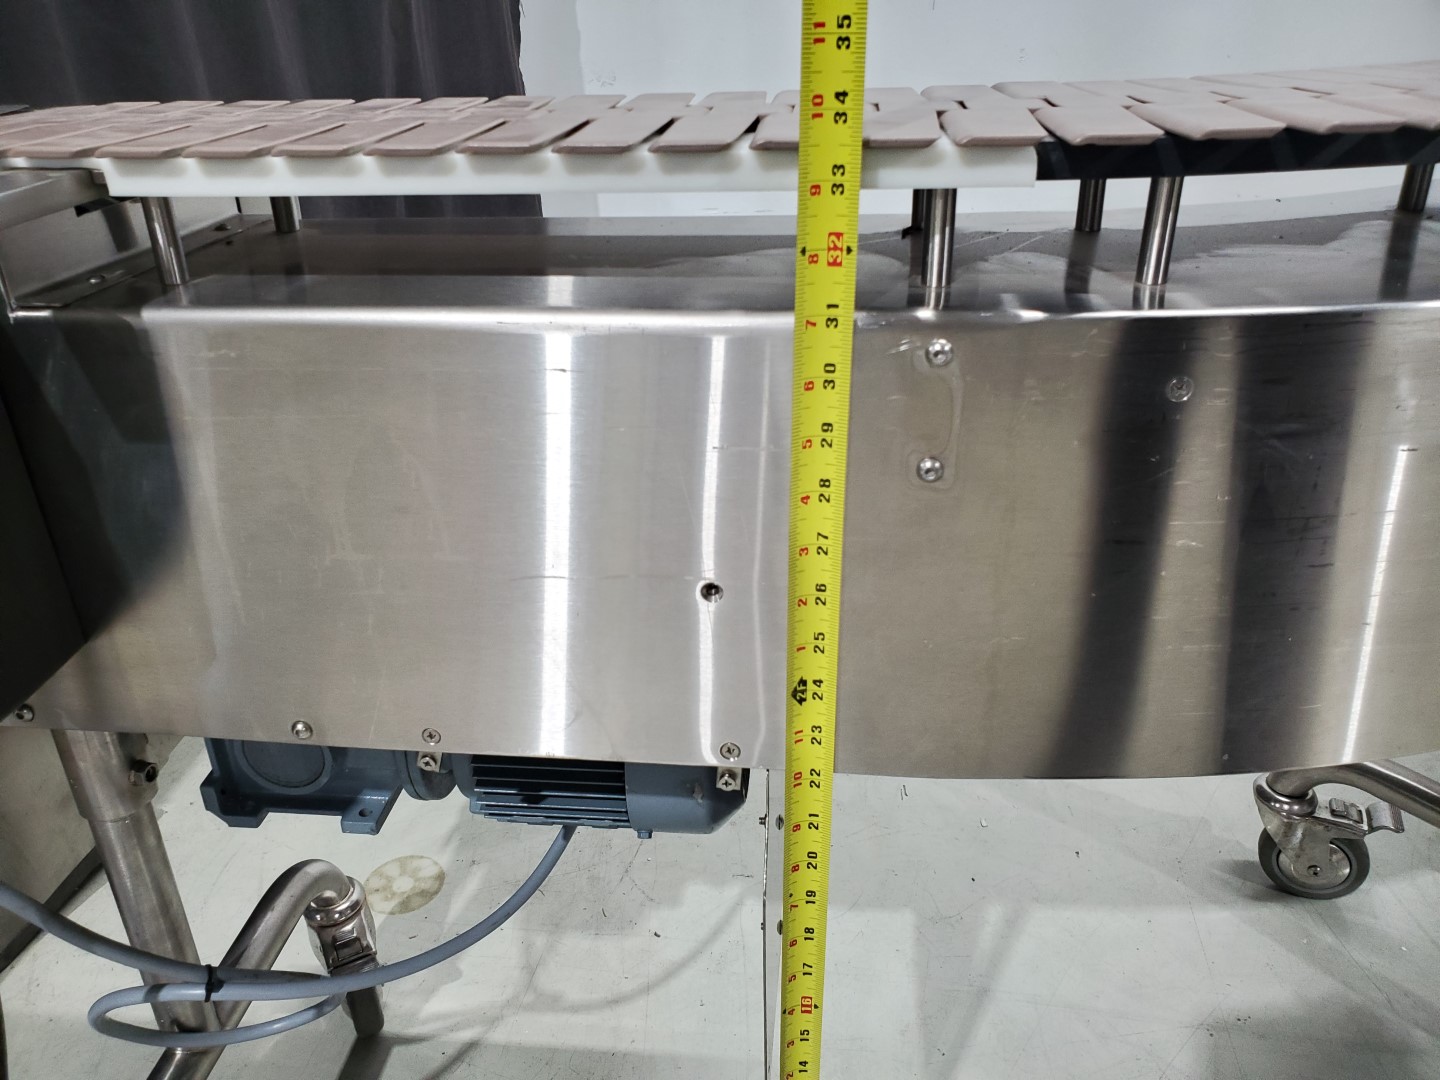 Used Stainless steel raise bed conveyor 7.5in wide chain with 2 curves